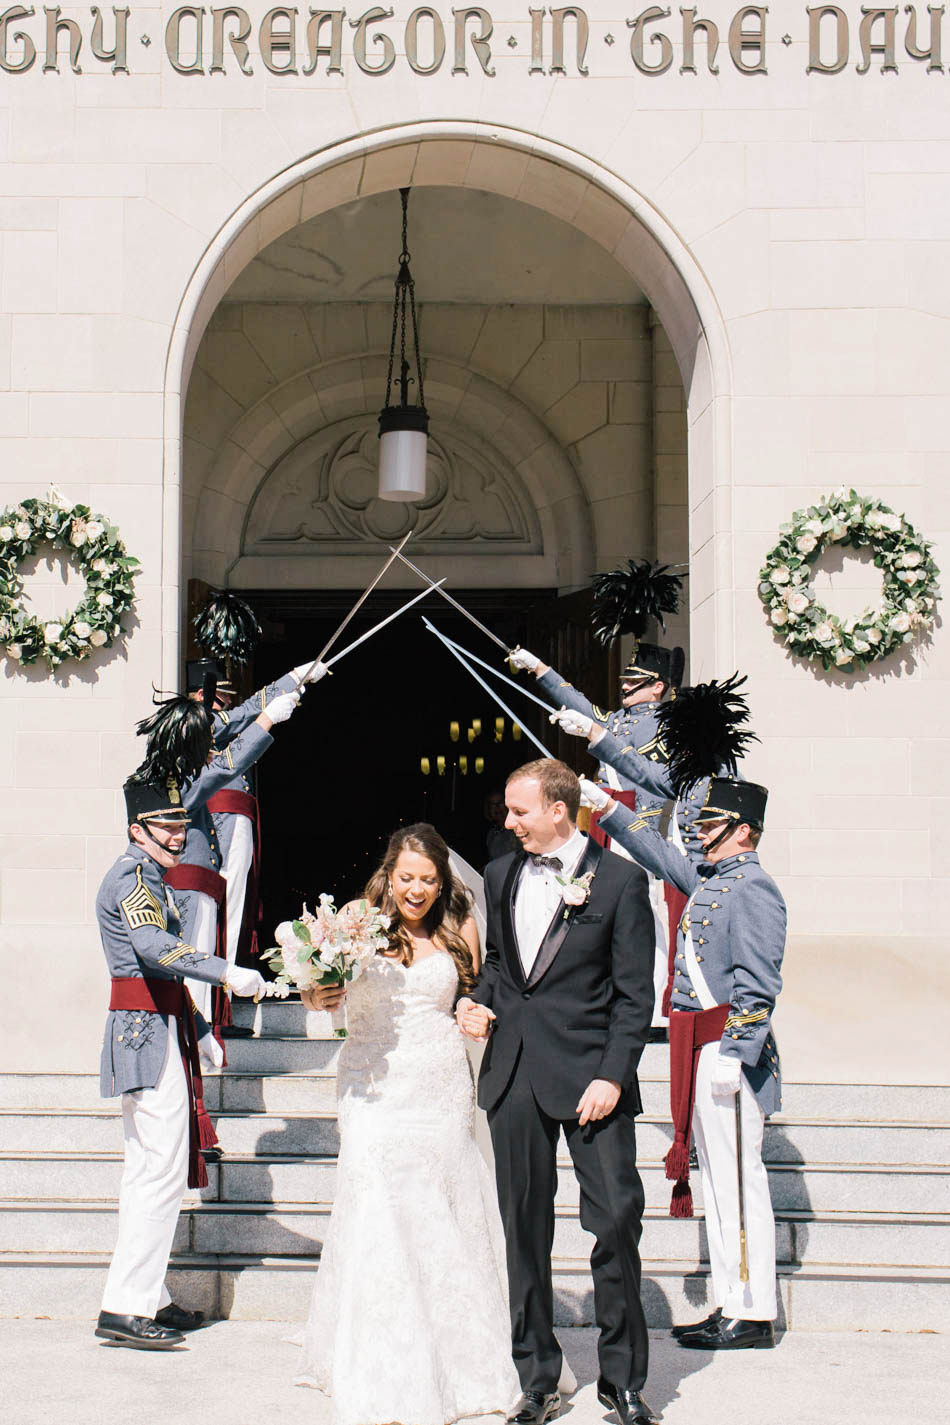 Bride and groom have sword exit, Summerall Chapel, South Carolina Kate Timbers Photography. http://katetimbers.com #katetimbersphotography // Charleston Photography // Inspiration